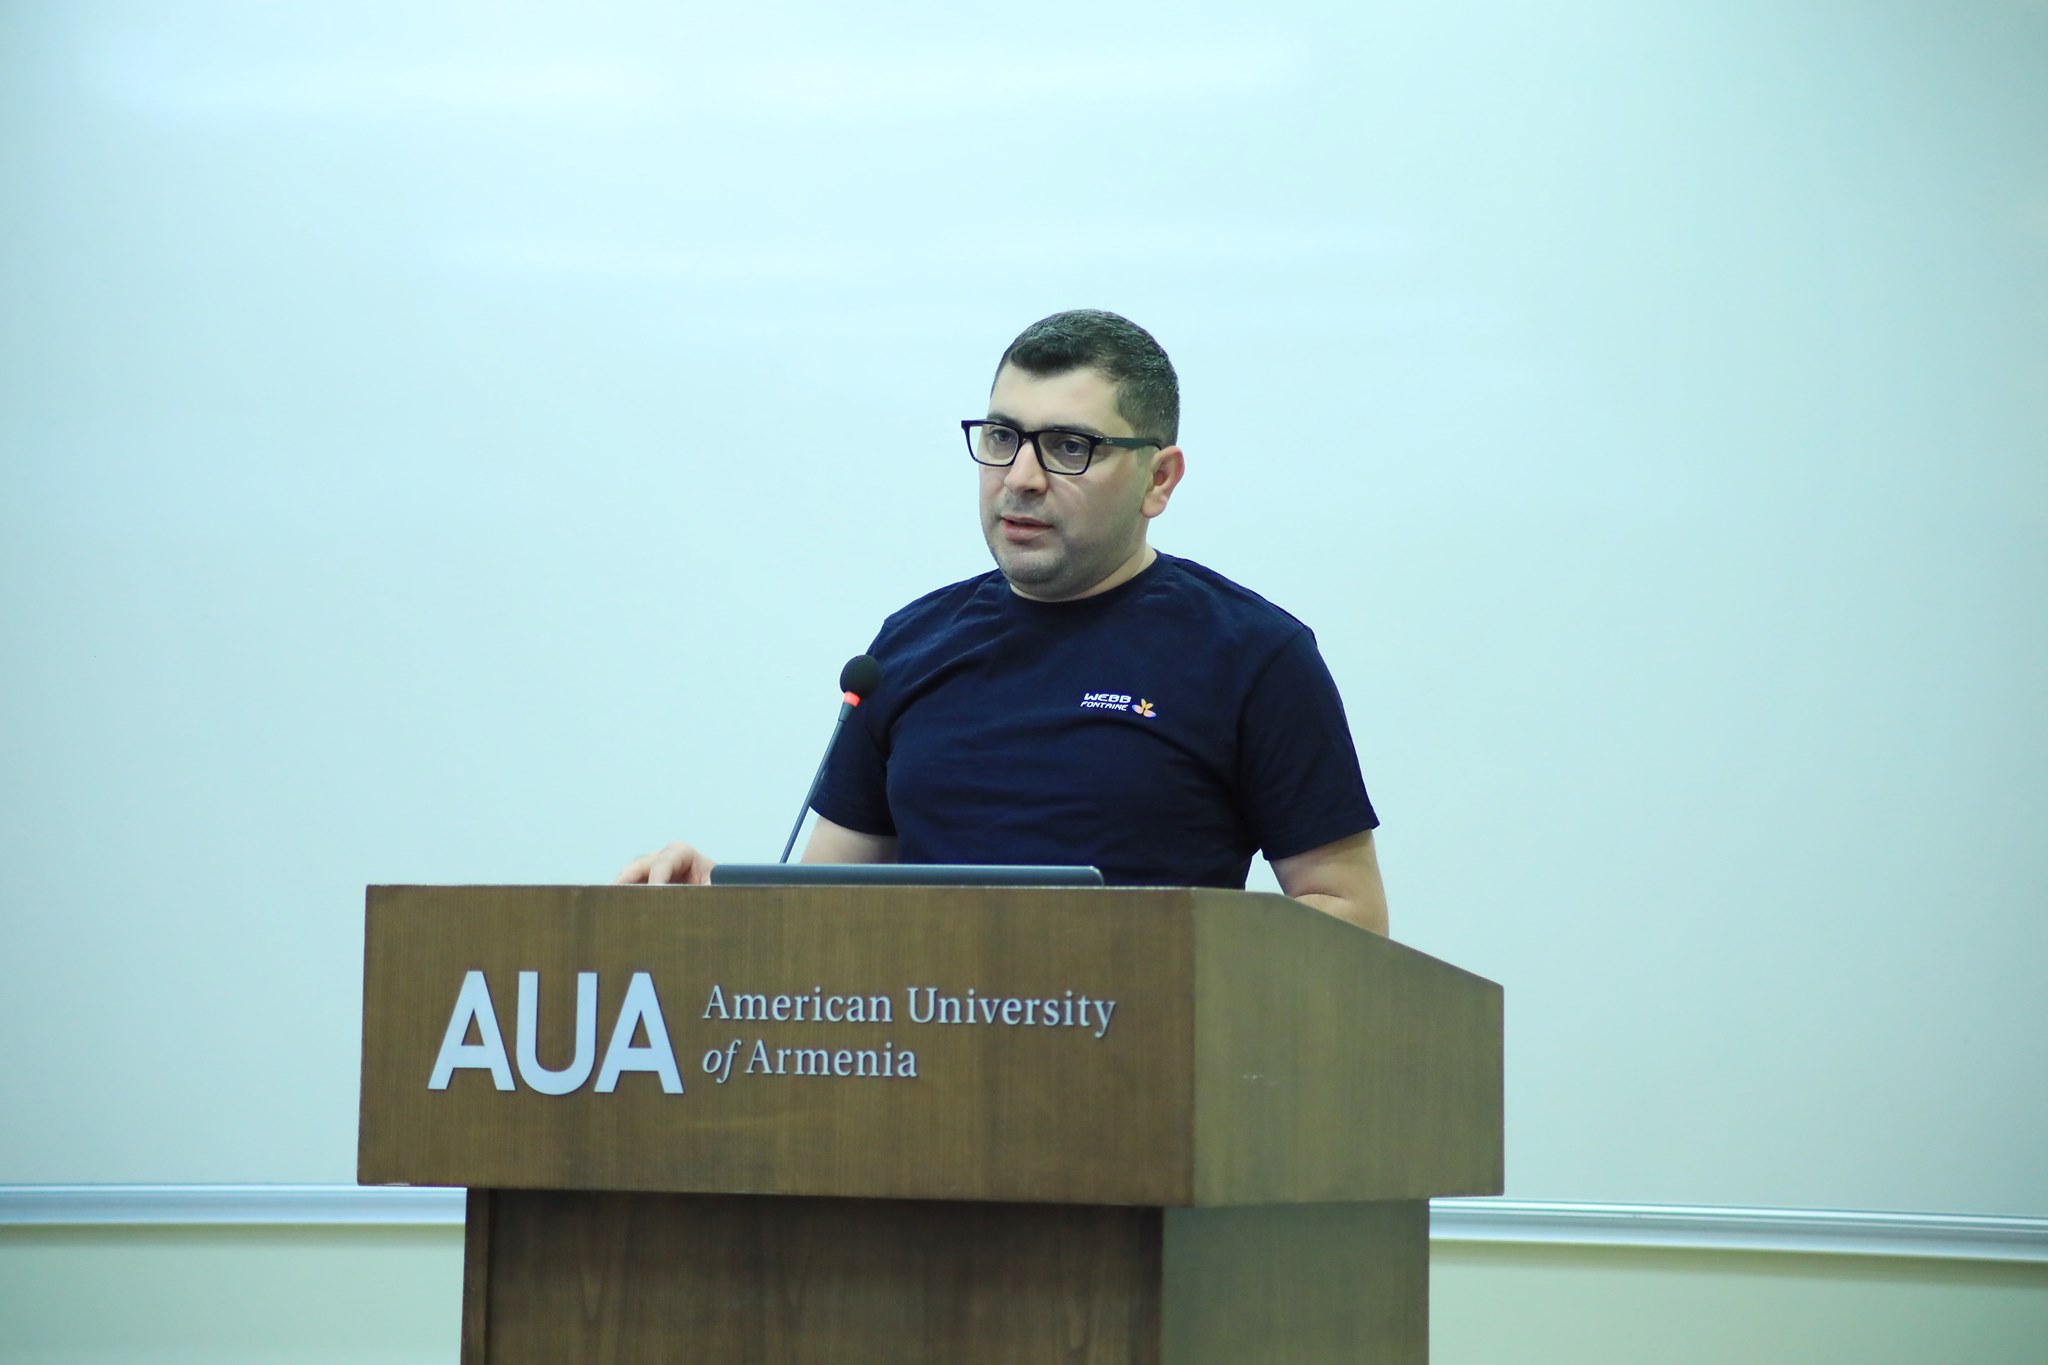 With the help of Webb Fontaine launched an unprecedented Summer School of Data Science in Armenia 1